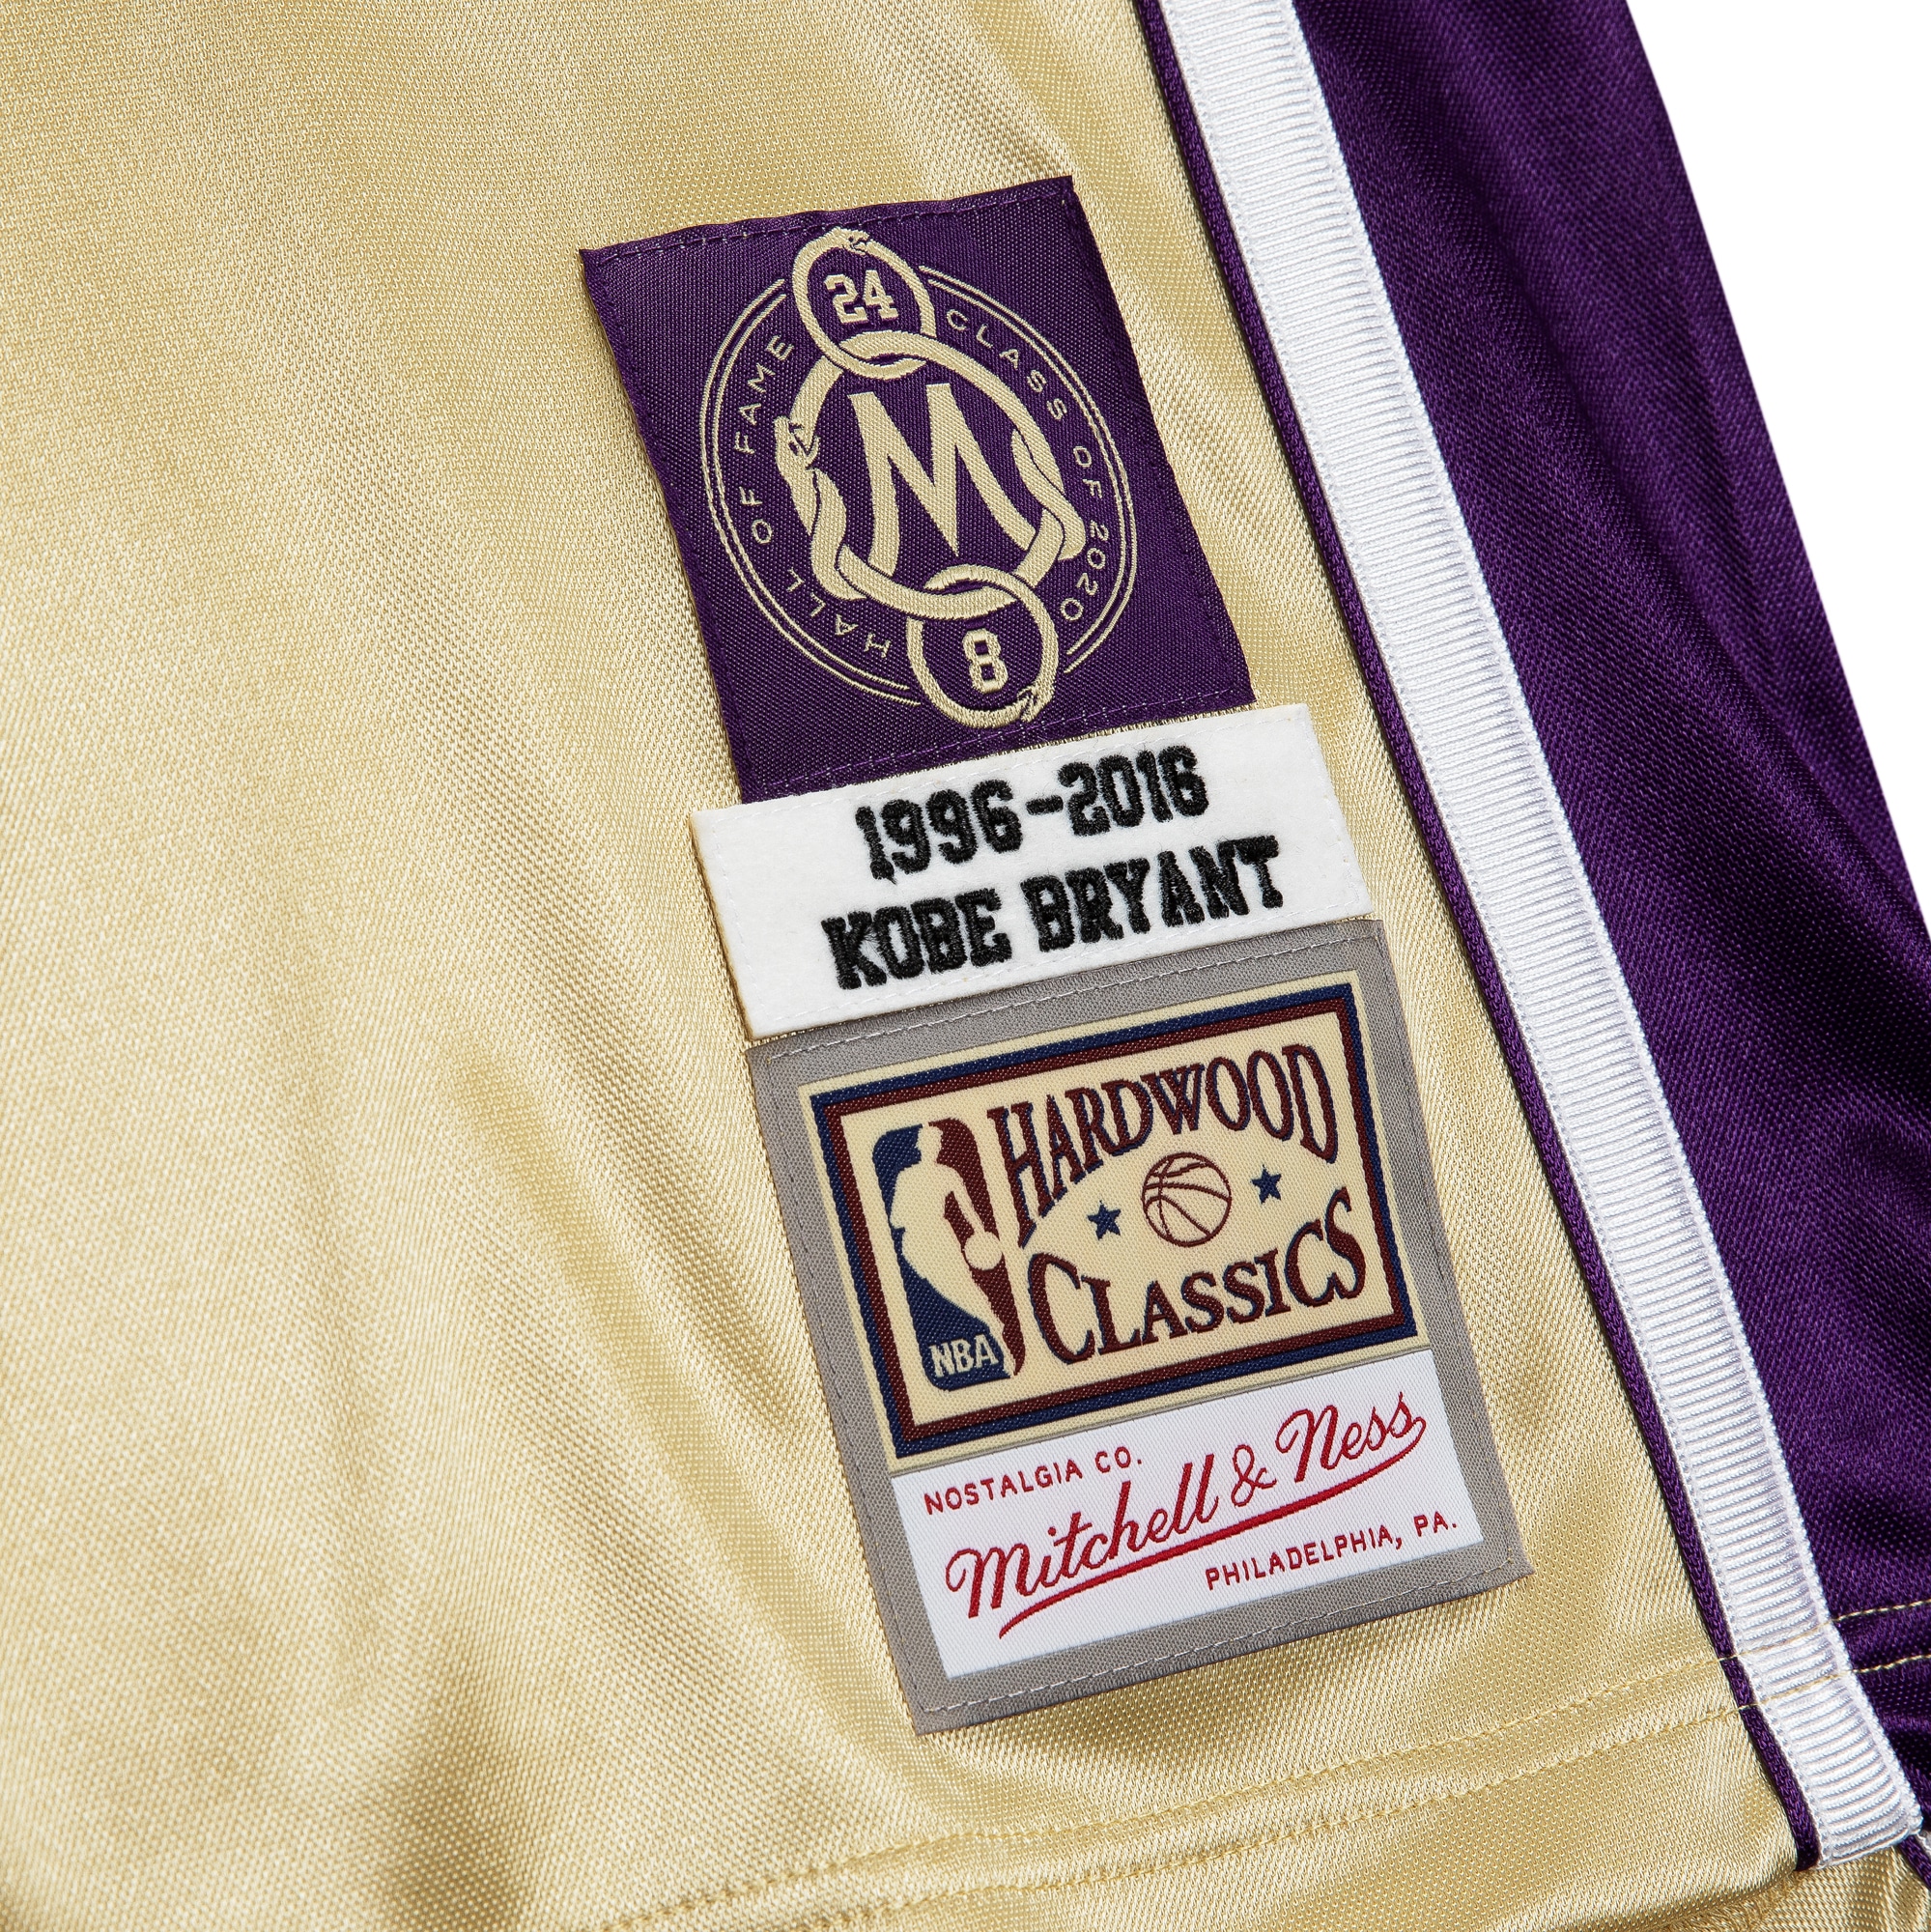 Maillot NBA Los Angeles Lakers violet Bryant 8 taille S